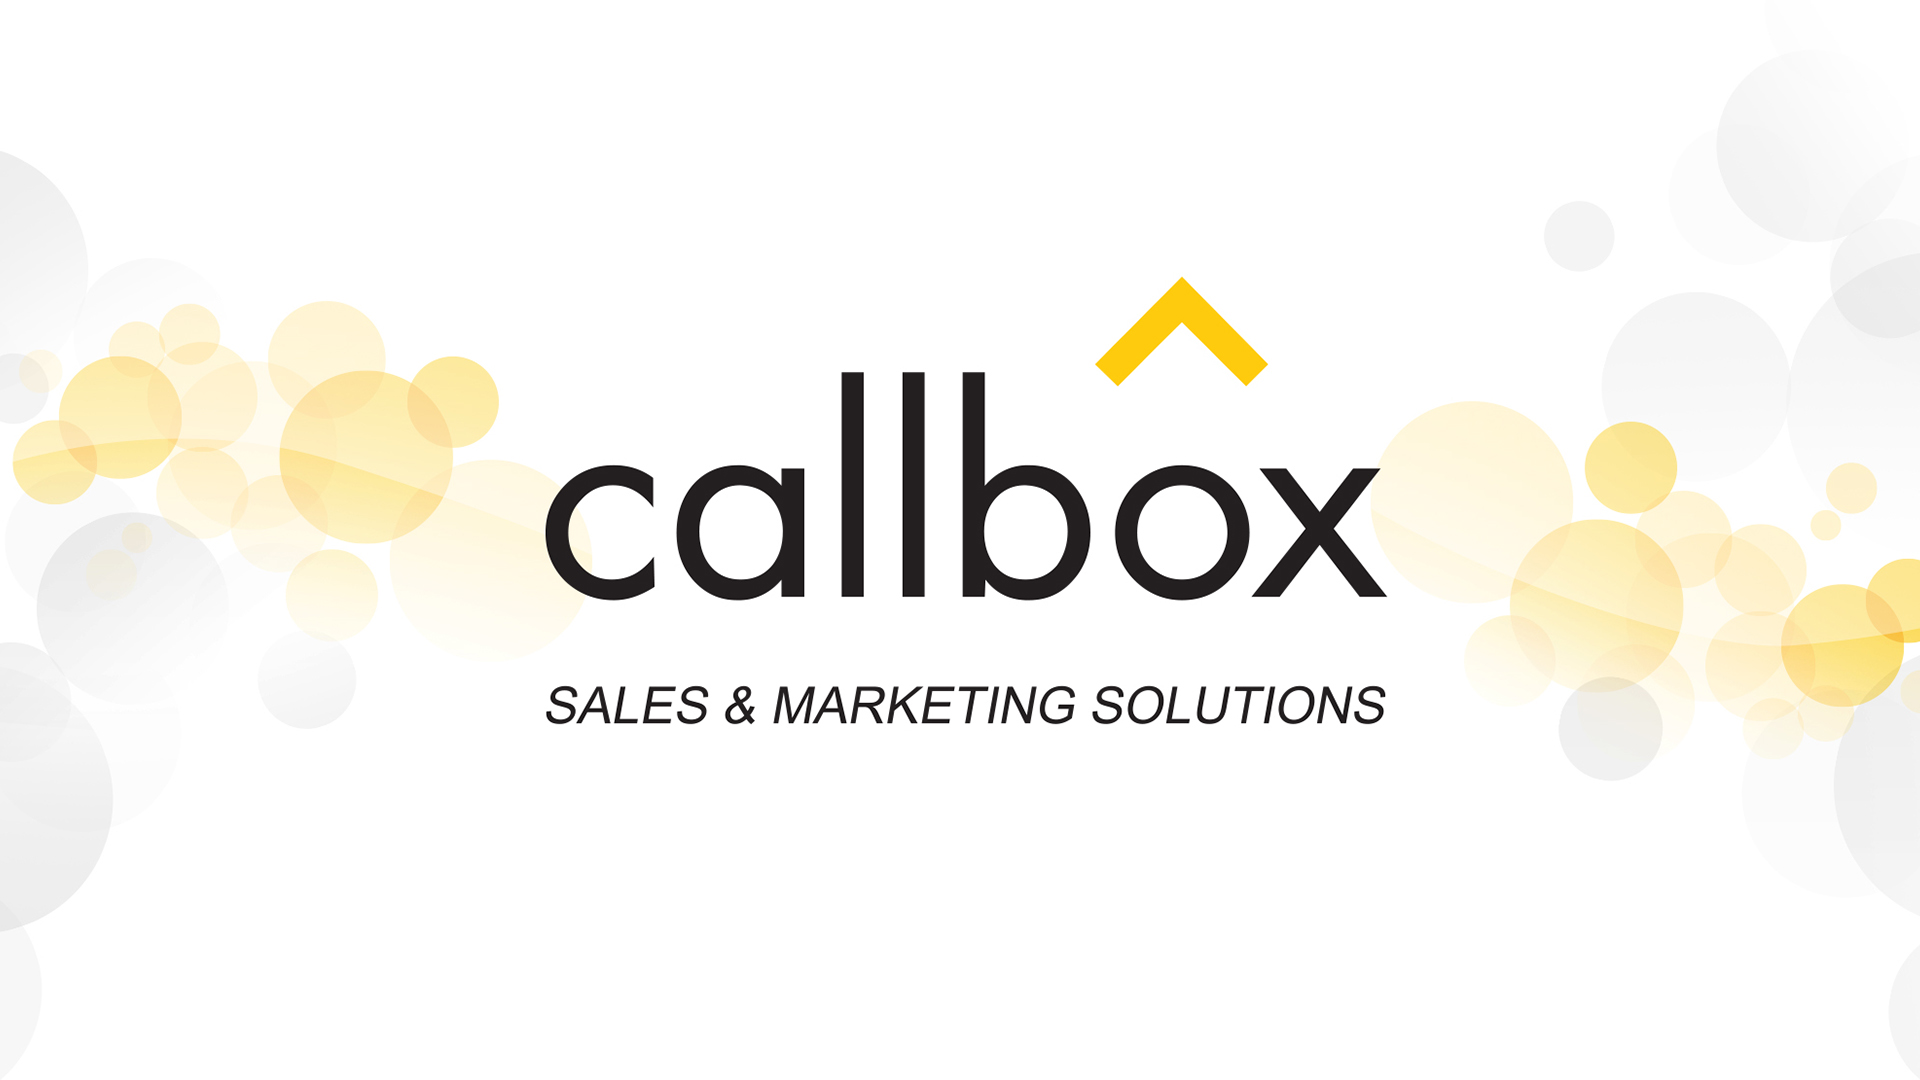 Callbox Videos - Lead Generation and Marketing Tips